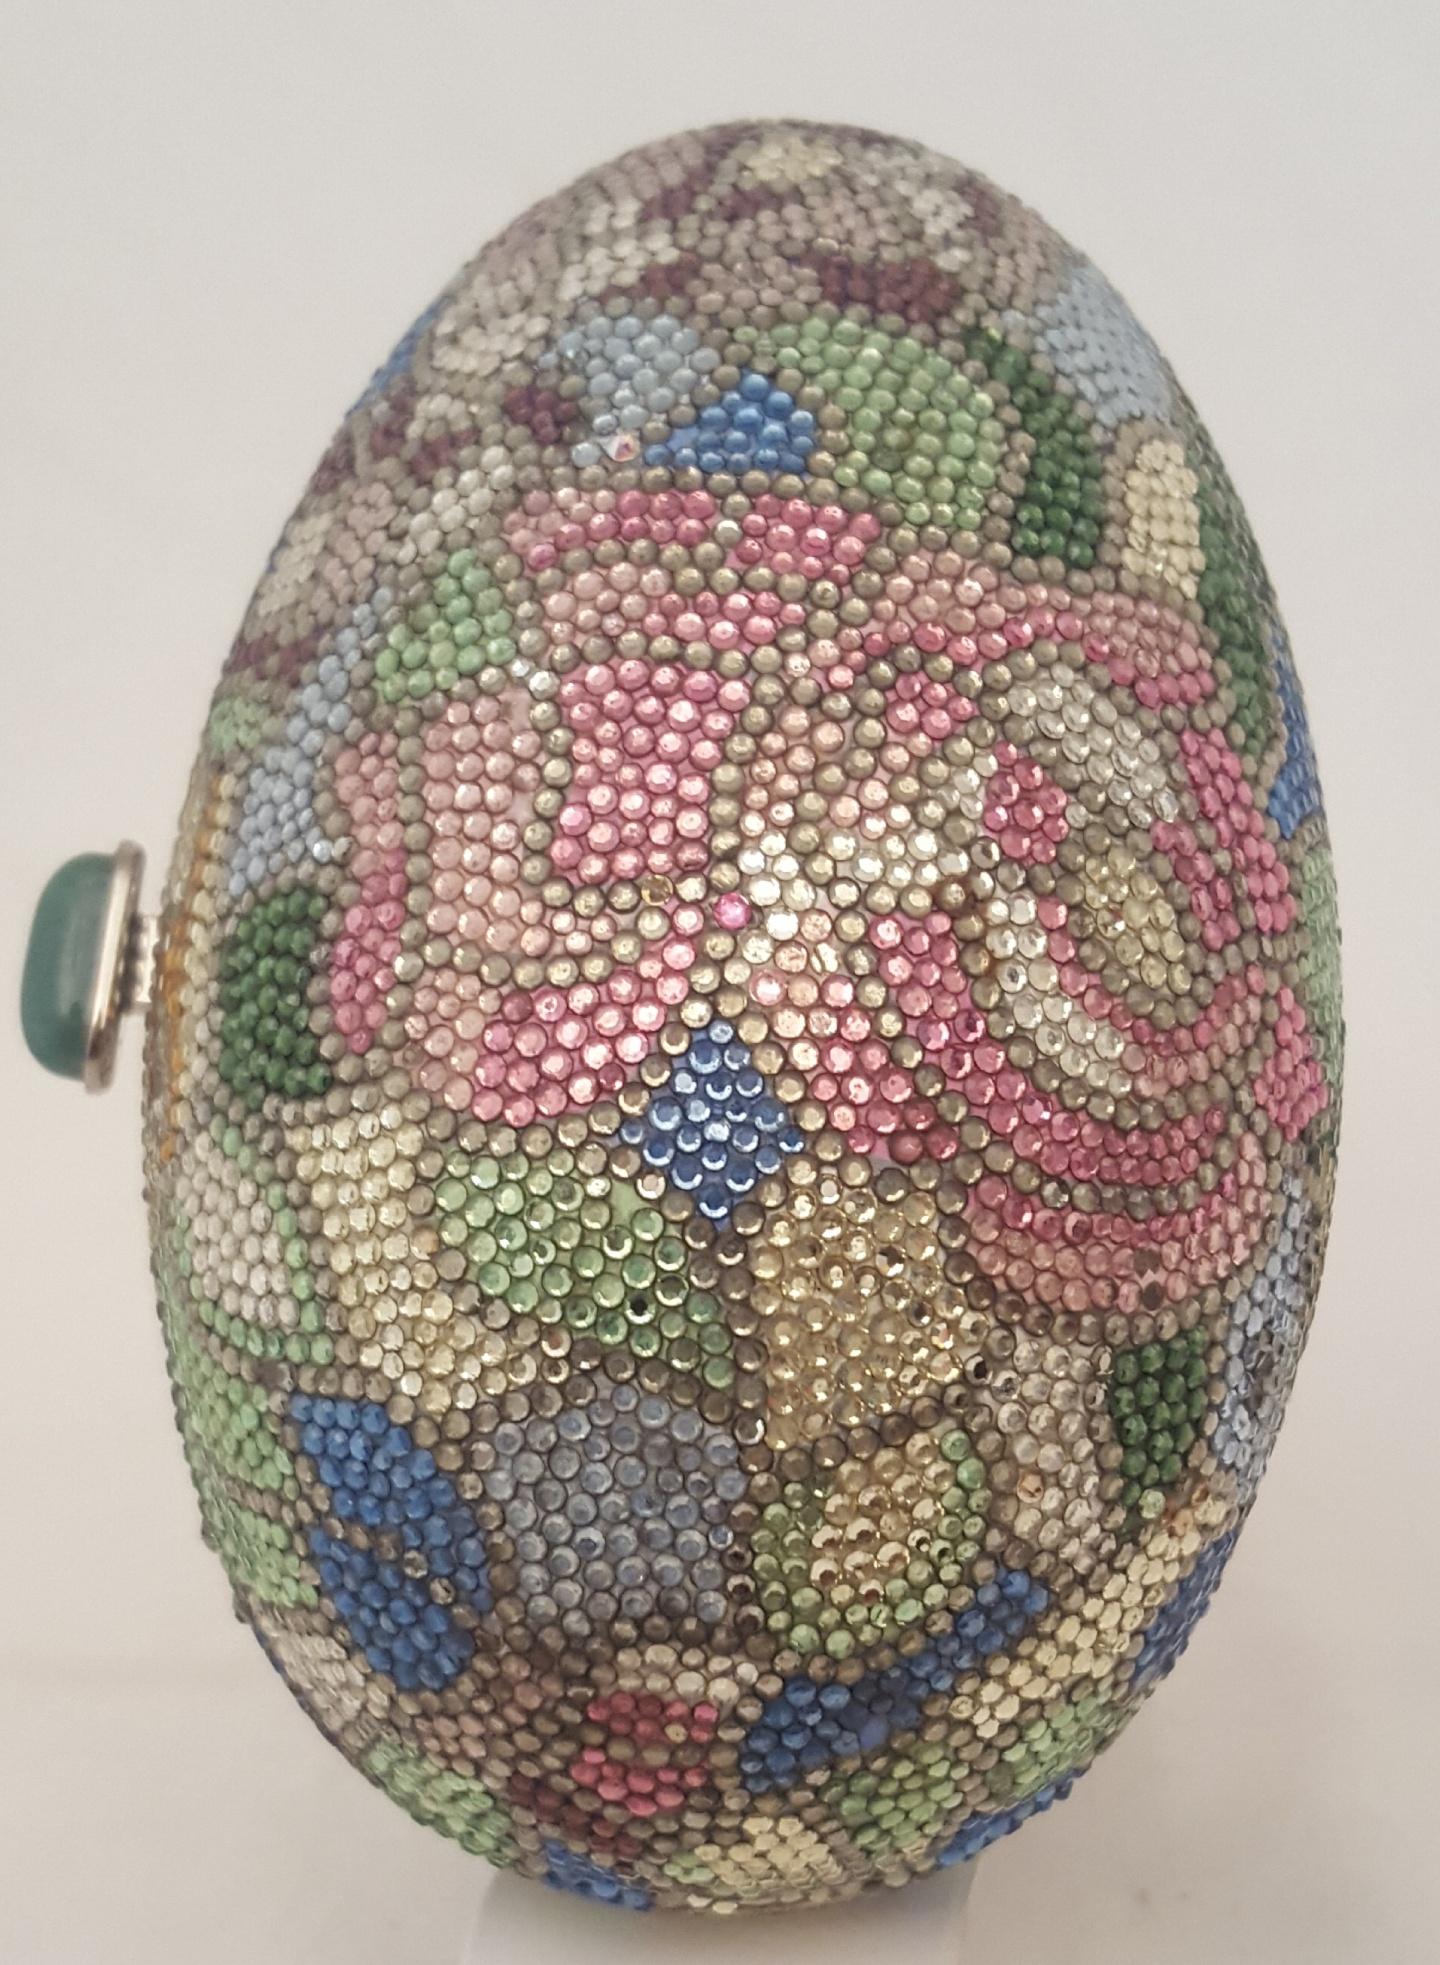 Add to your collection this highly sought after Judith Leiber Egg with Swarovski crystal minaudiere bag crafted from individually placed multi color crystals. This egg with a floral theme contains pink, lavender and white flower on a mosaic